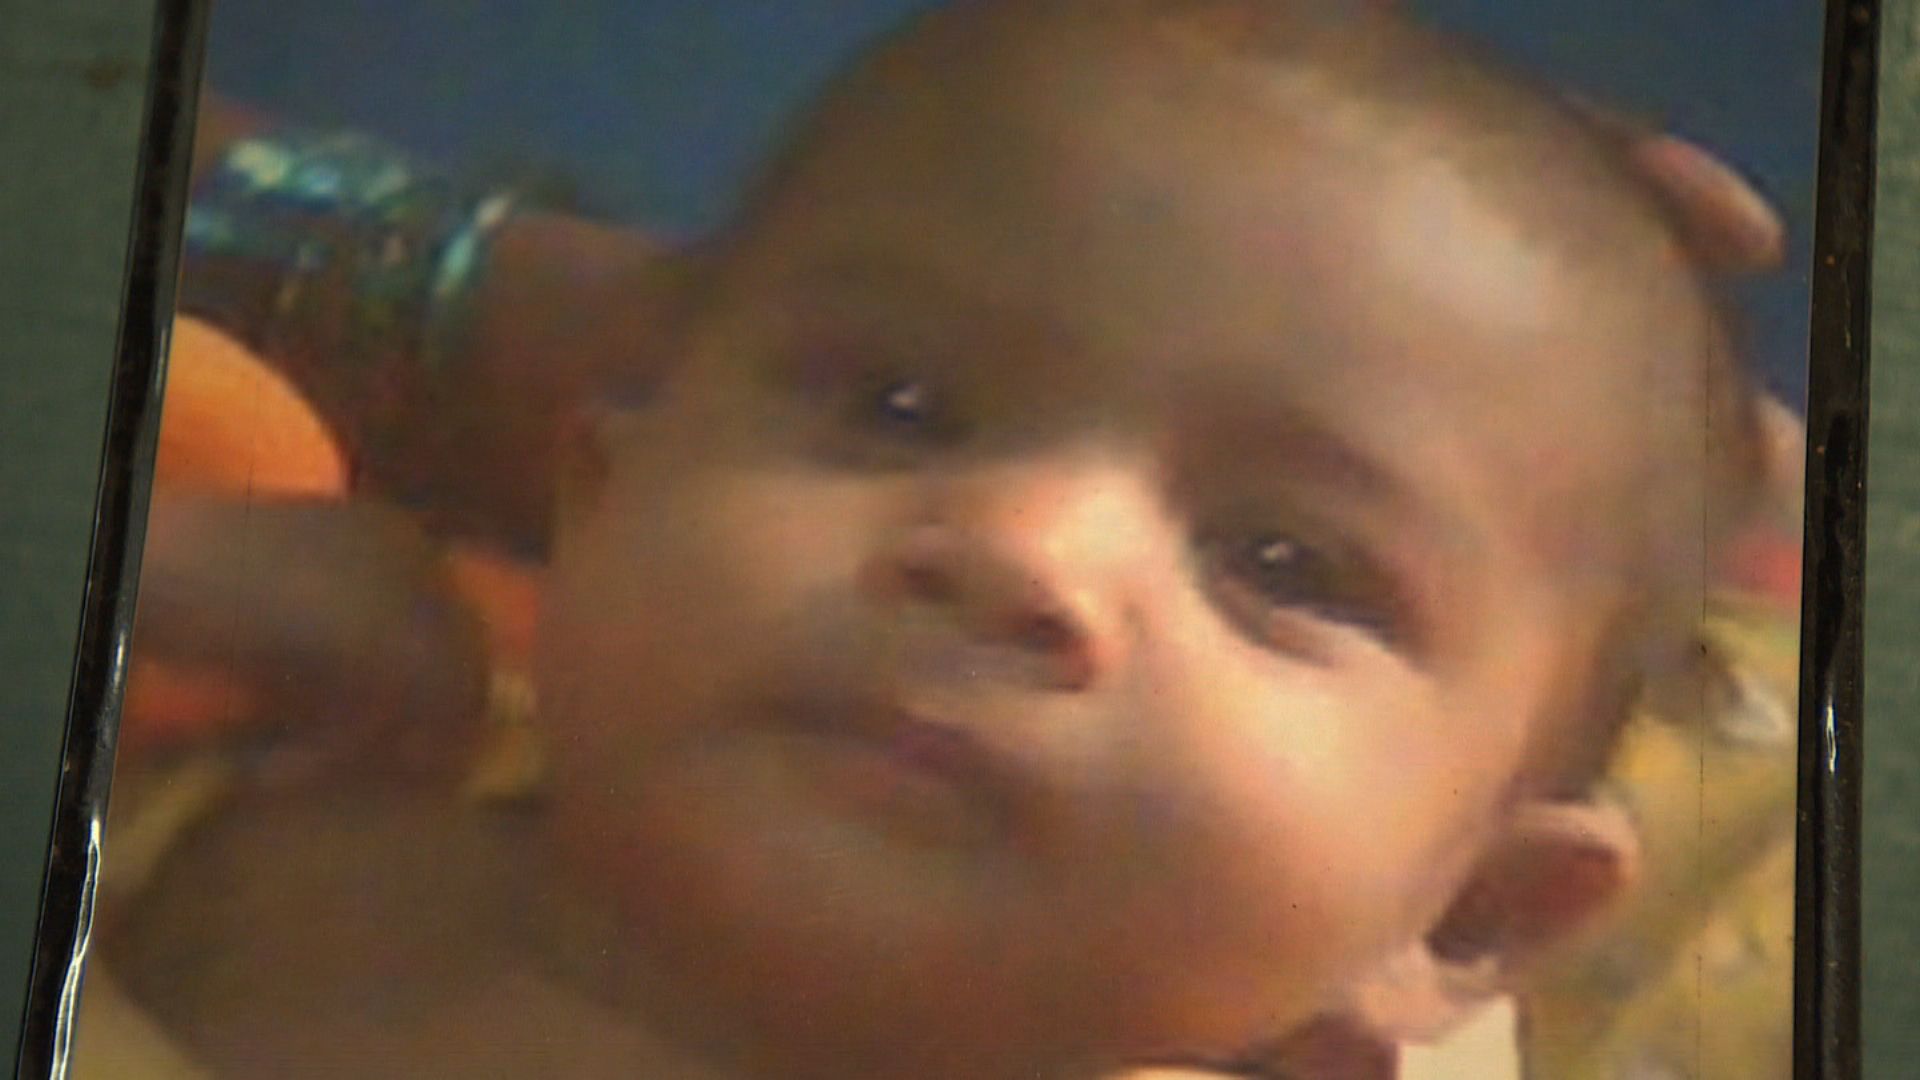 Toddler Forced Sex - Indian father accused of killing baby 'for being a girl' | CNN